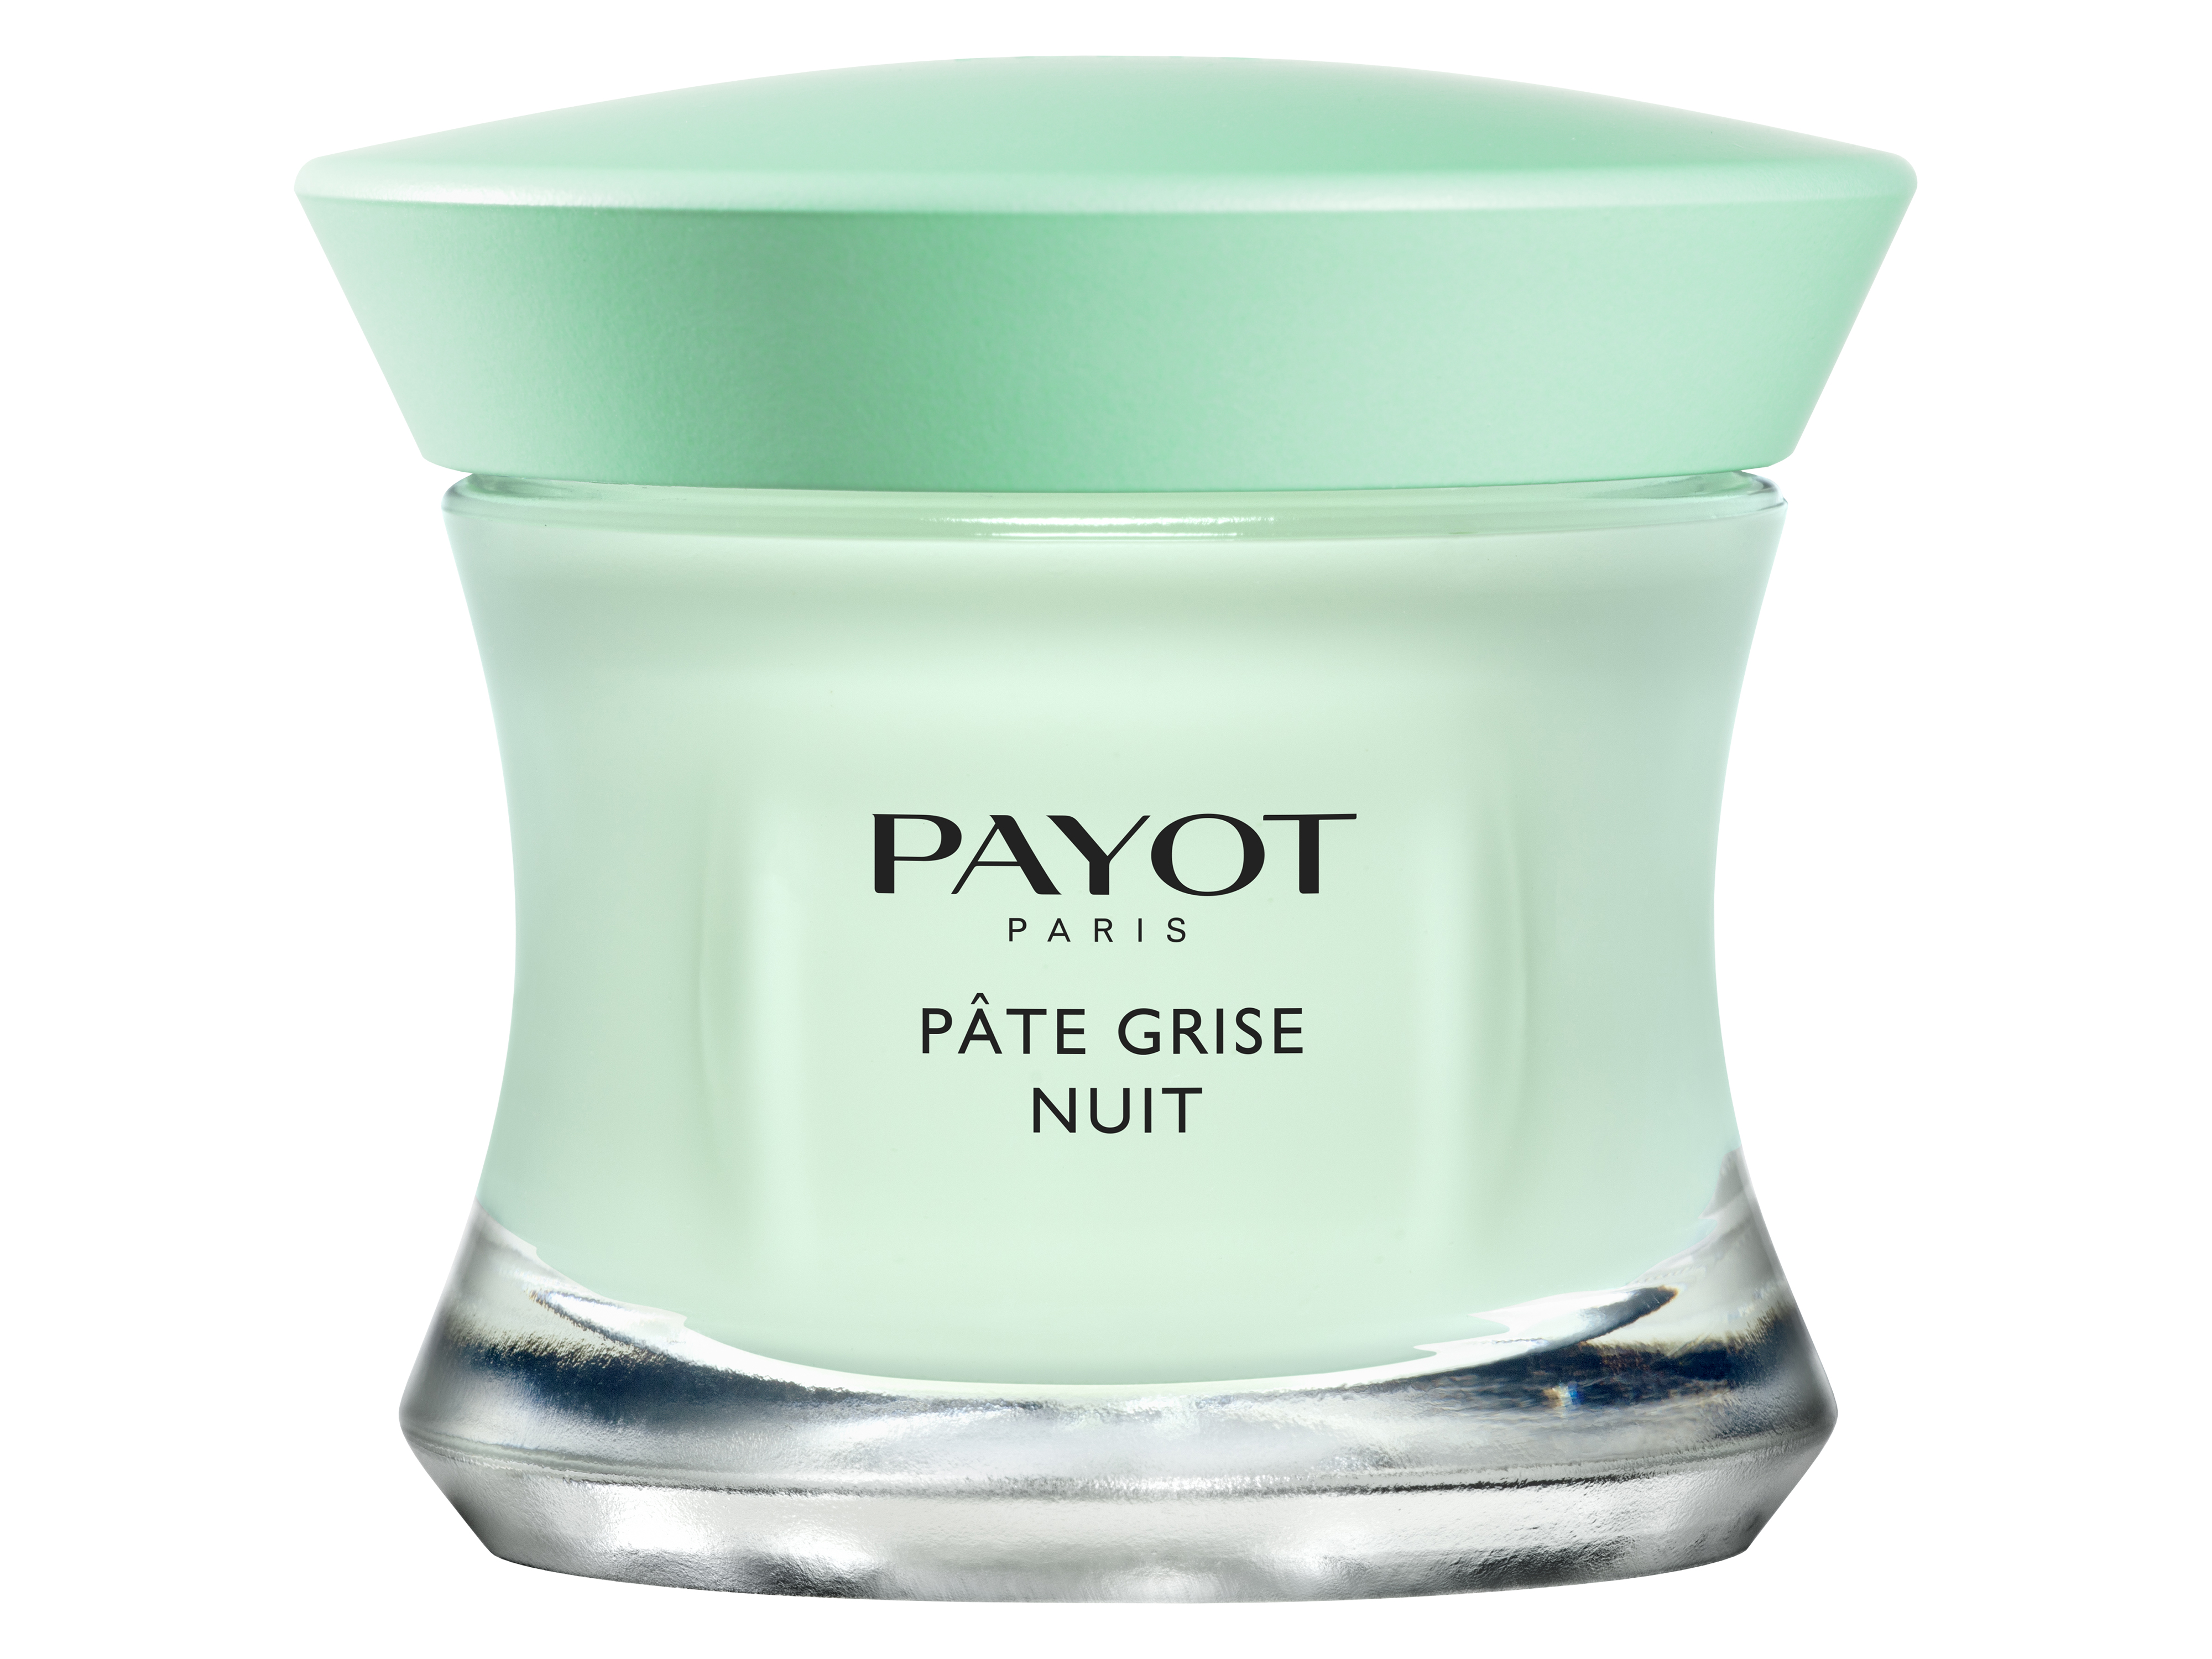 Payot Pate Grise Nuit, 50 ml